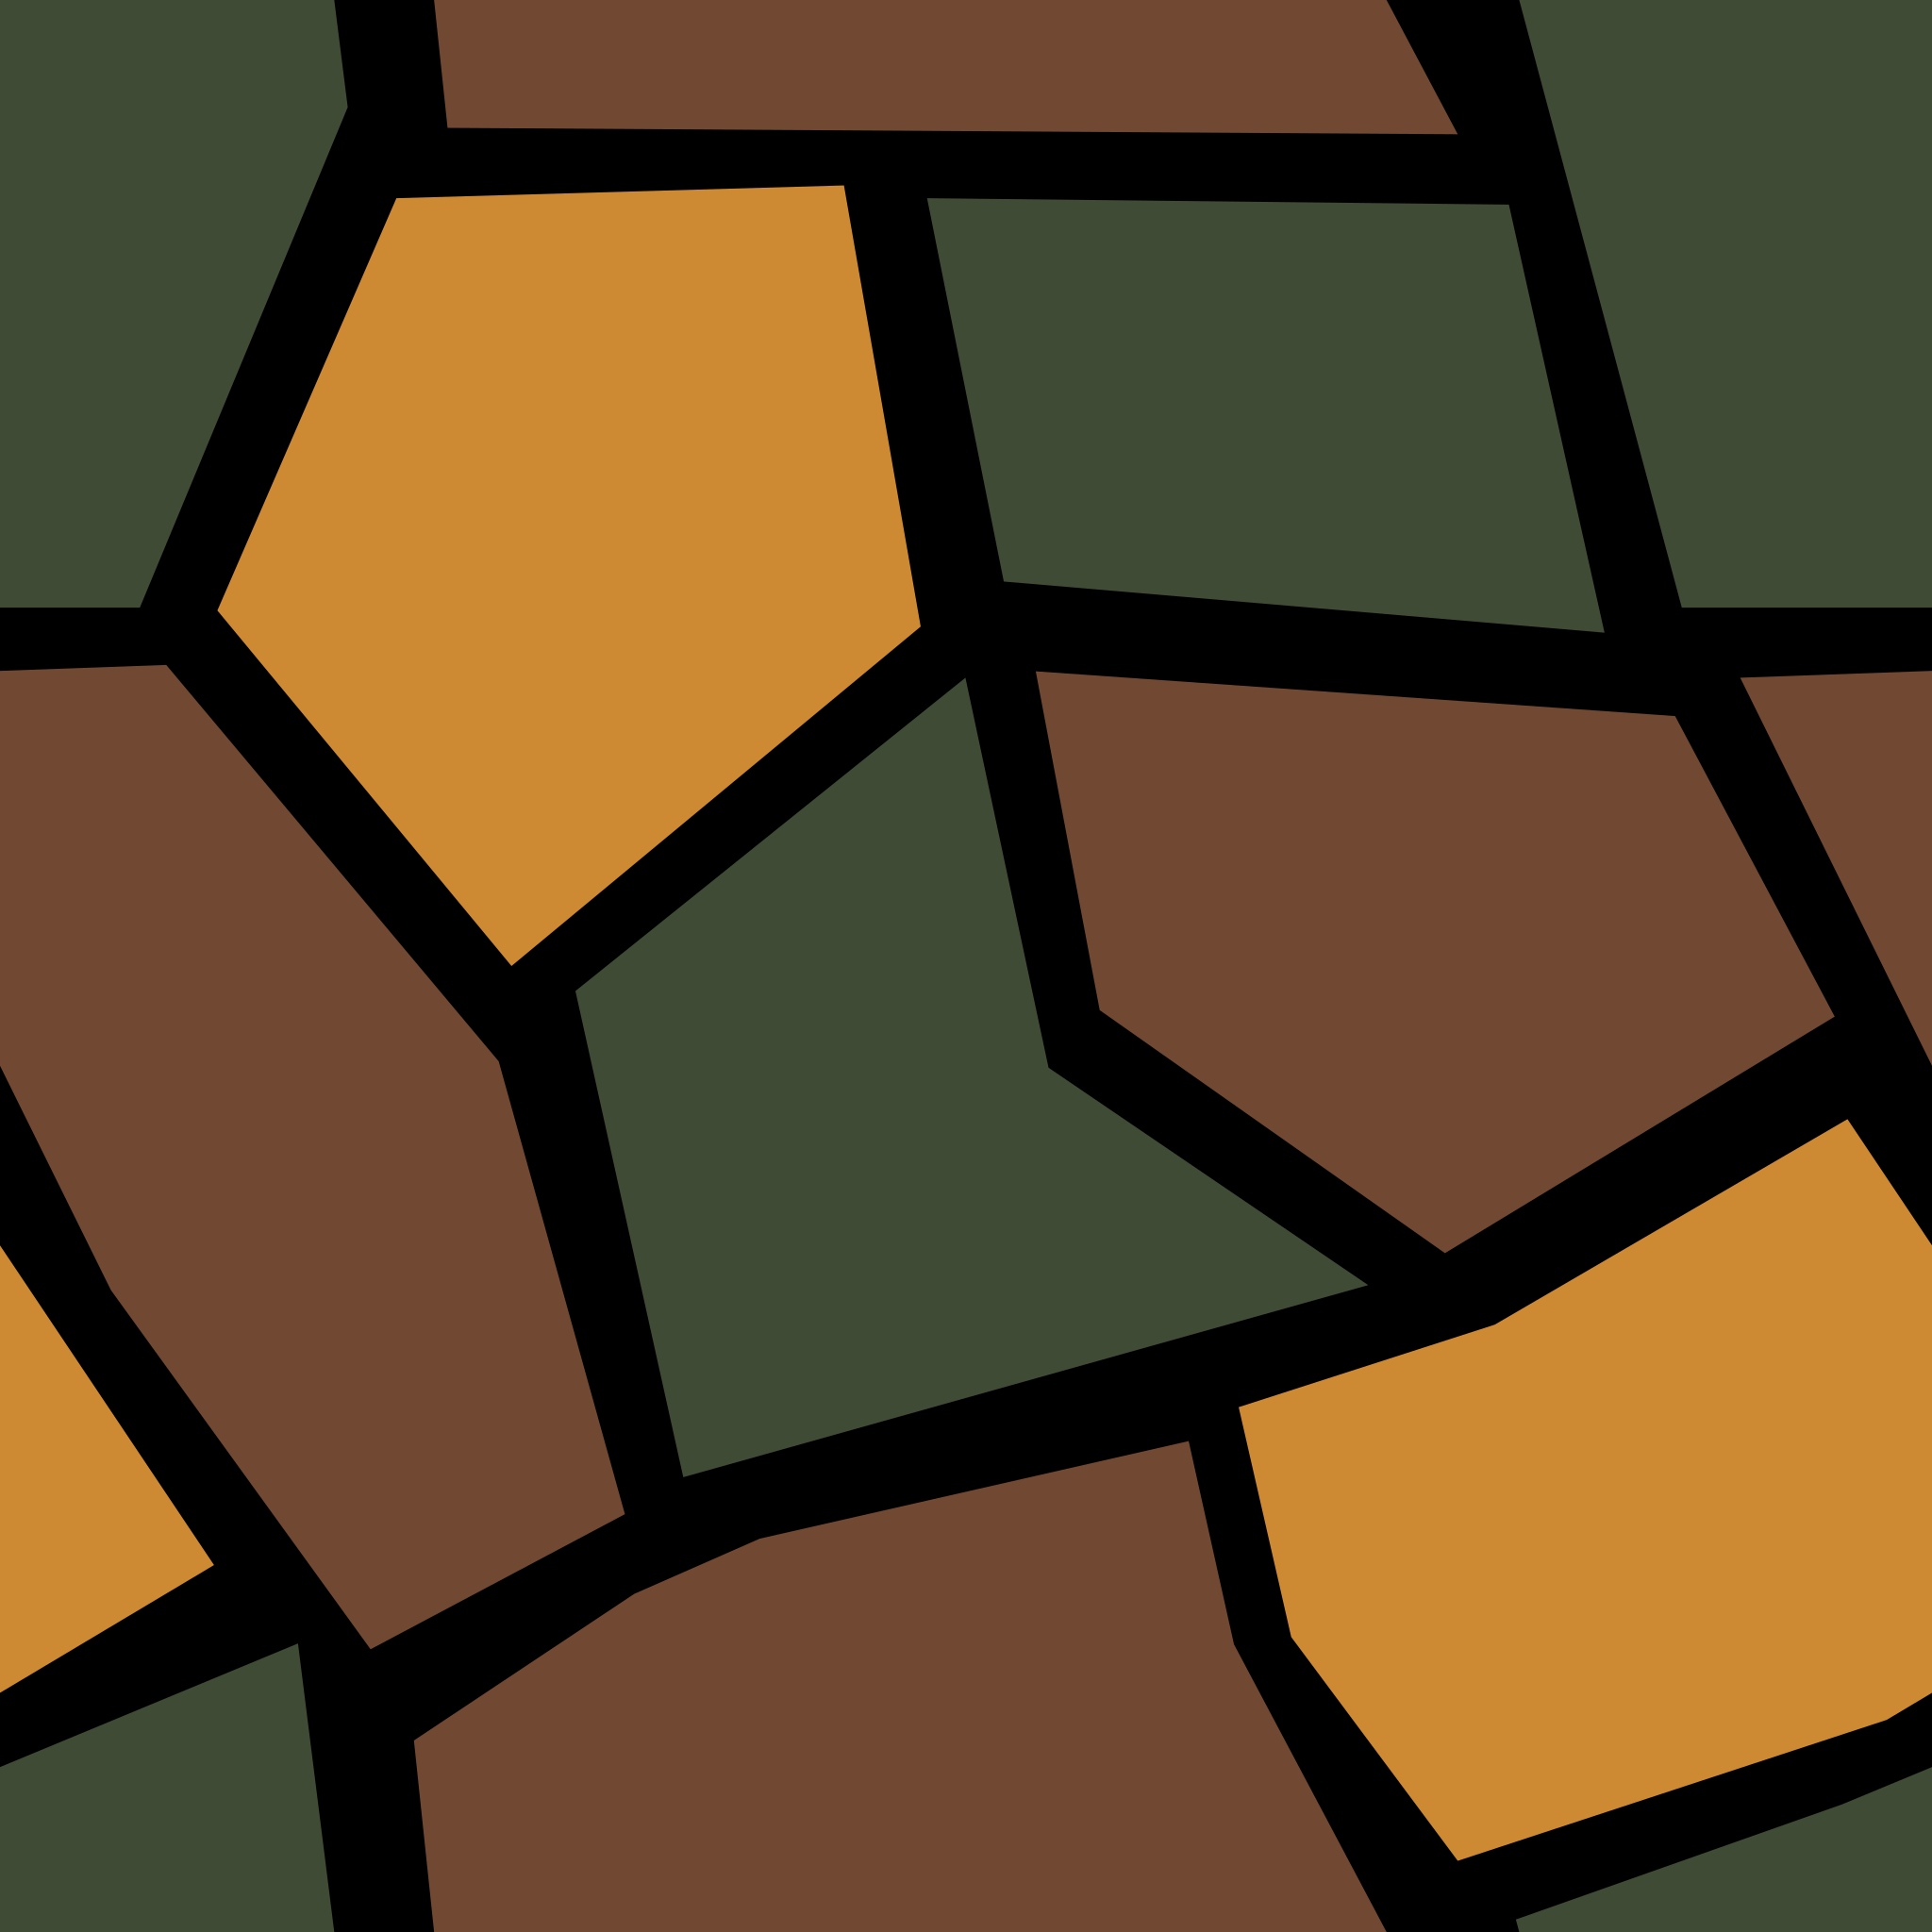 https://upload.wikimedia.org/wikipedia/commons/thumb/c/cb/Buntfarbenanstrich_1918_german_empire_camouflage_seamless_CC_BY-SA_4.0_by_Grasyl.svg/2048px-Buntfarbenanstrich_1918_german_empire_camouflage_seamless_CC_BY-SA_4.0_by_Grasyl.svg.png